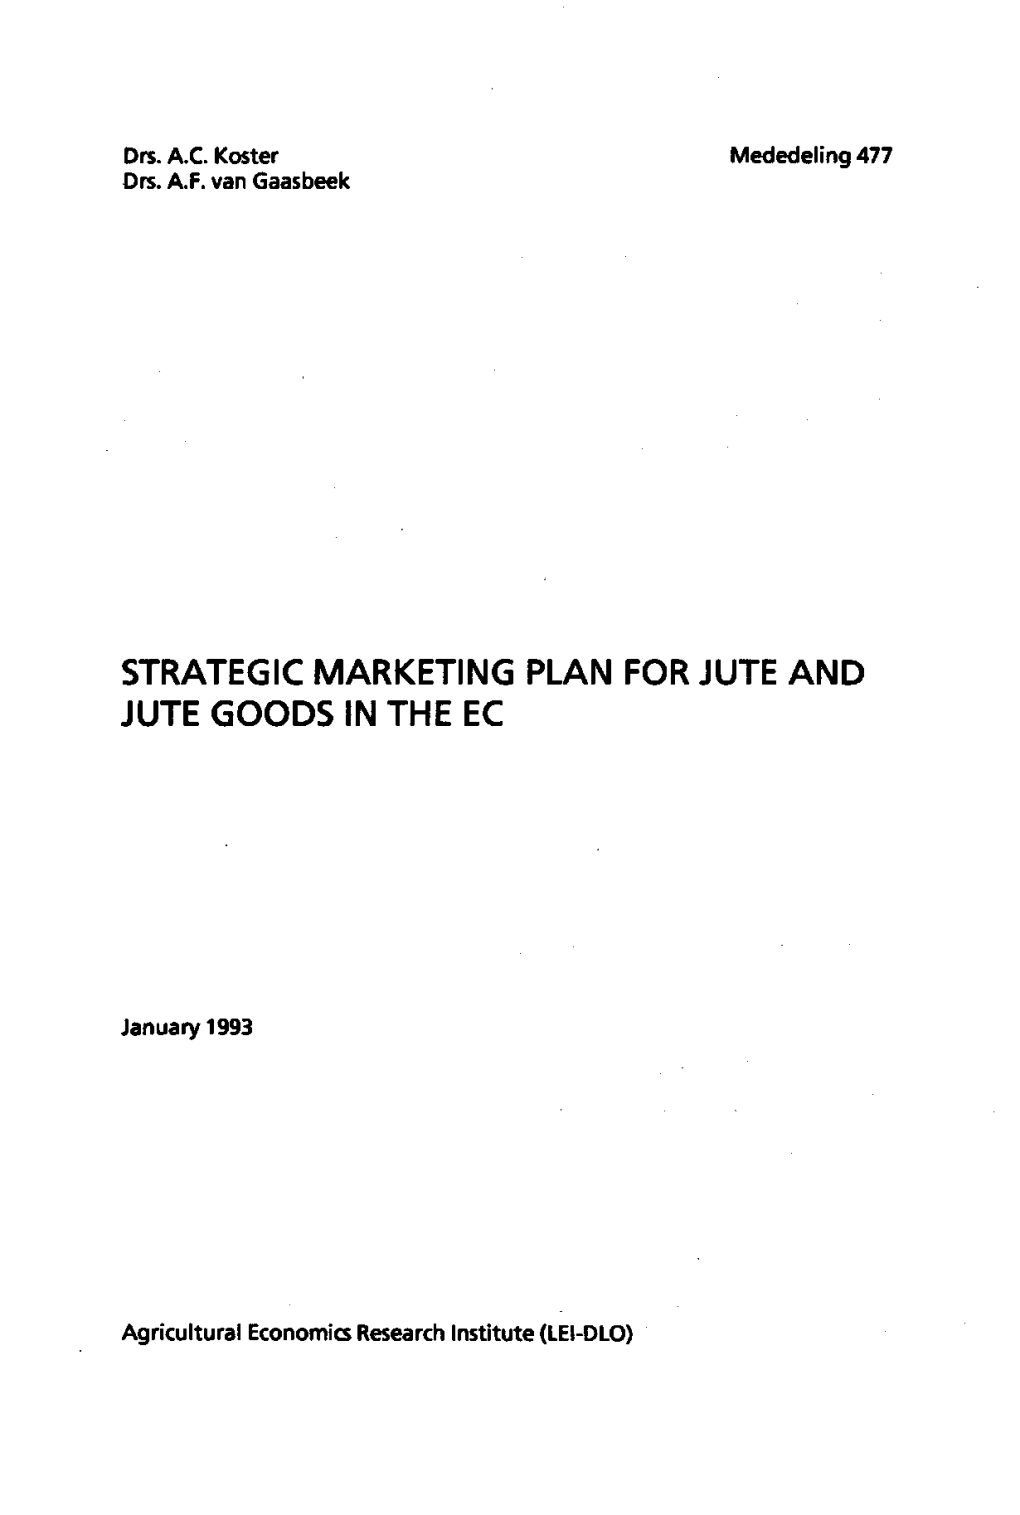 Strategic Marketing Plan for Jute and Jute Goods in the Echa S Been Developed by the LEI-DLO for the International Jute Organization